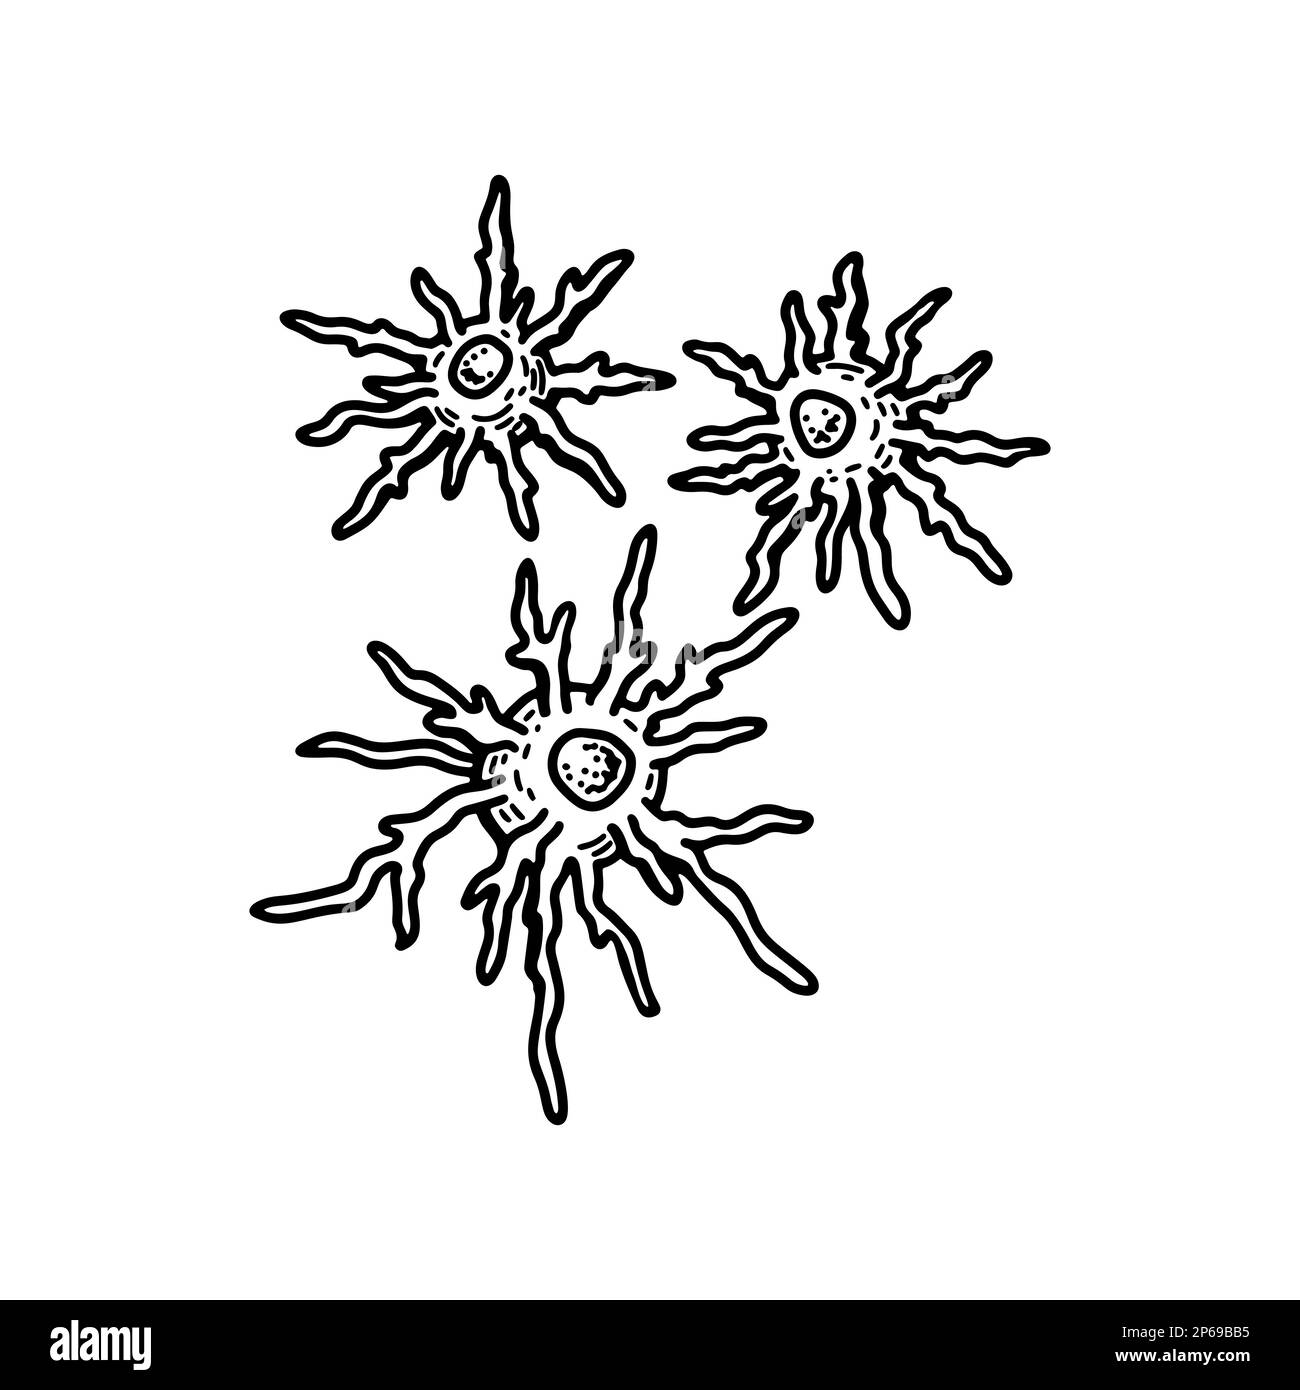 Dendritic blood cell isolated on white background. Hand drawn scientific microbiology vector illustration in sketch style Stock Vector